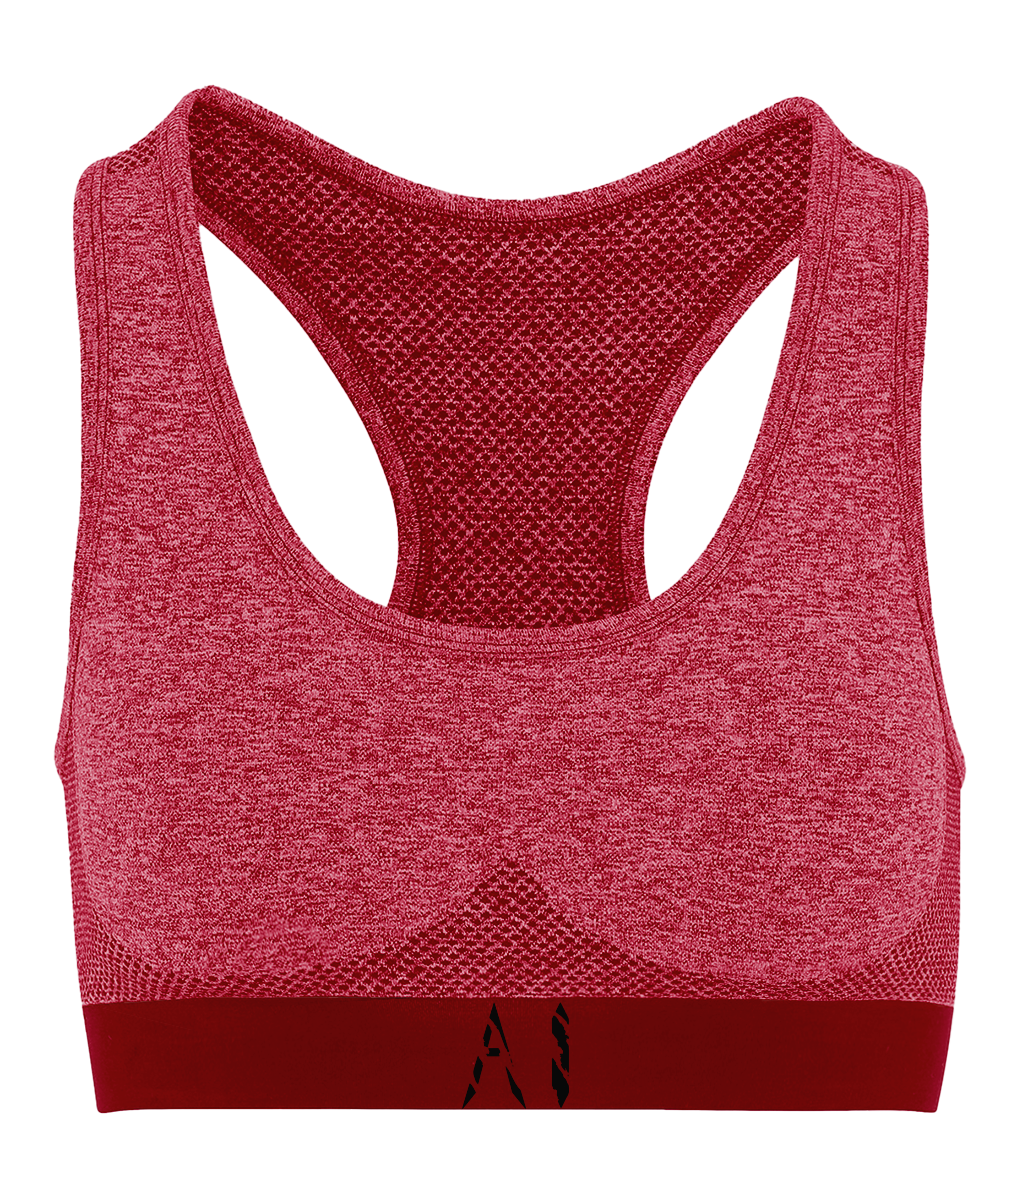 Womens Red Athletic Seamless Sports Bra with Black AI logo on bottom strap